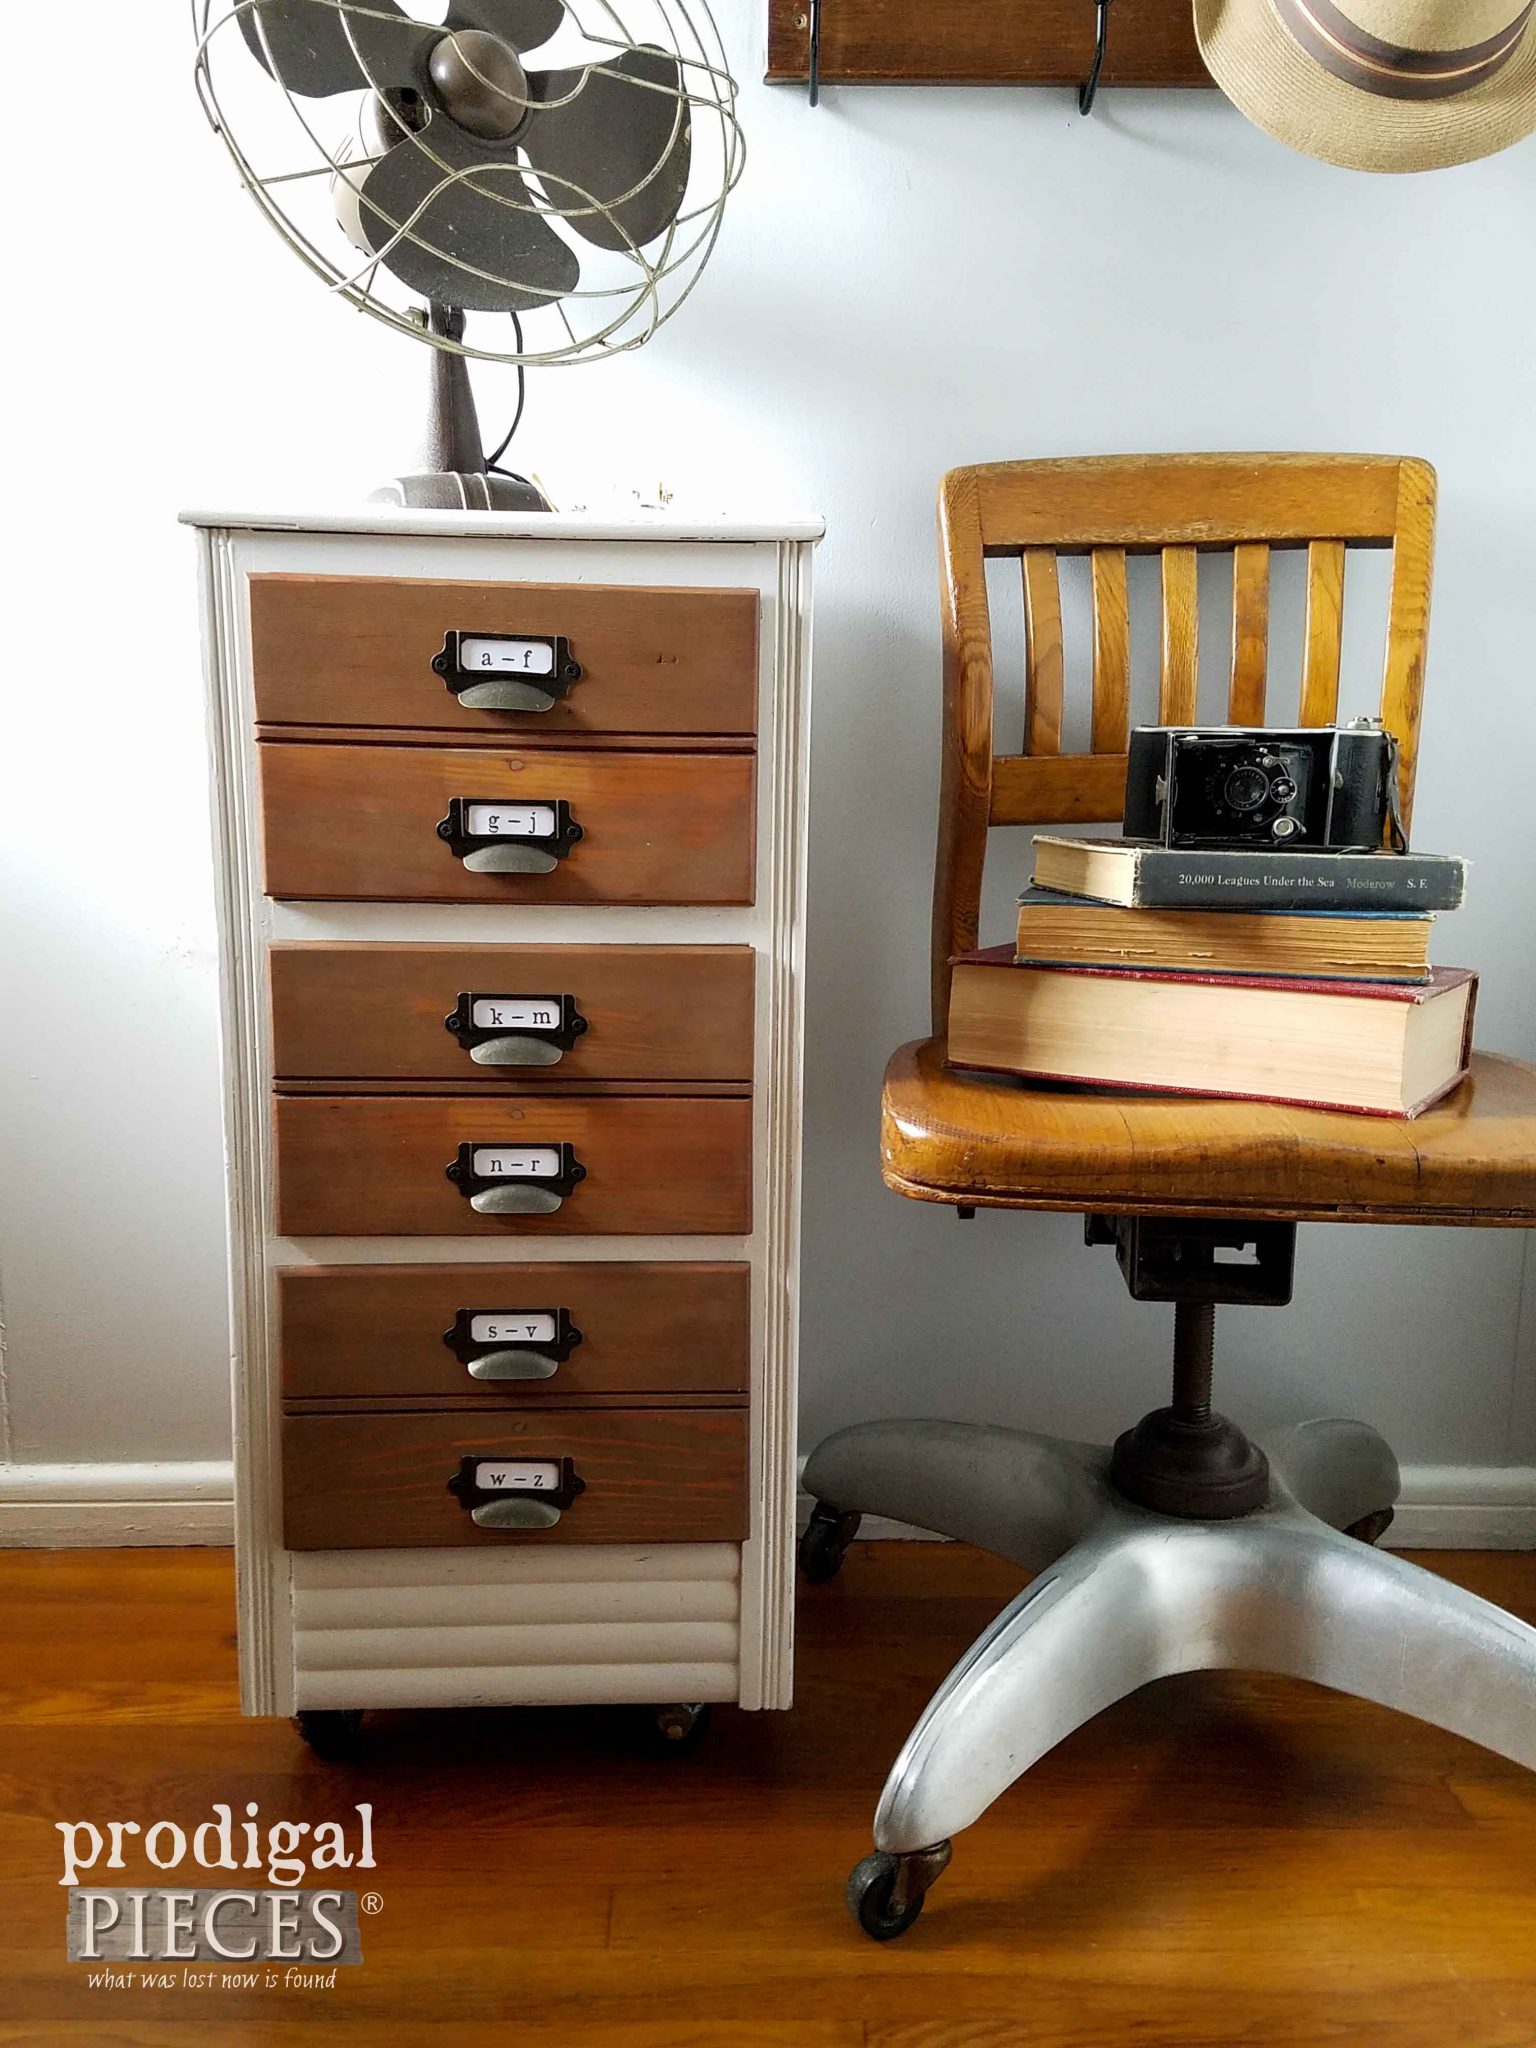 Upcycled Stand into Apothecary Cabinet by Prodigal Pieces | prodigalpieces.com